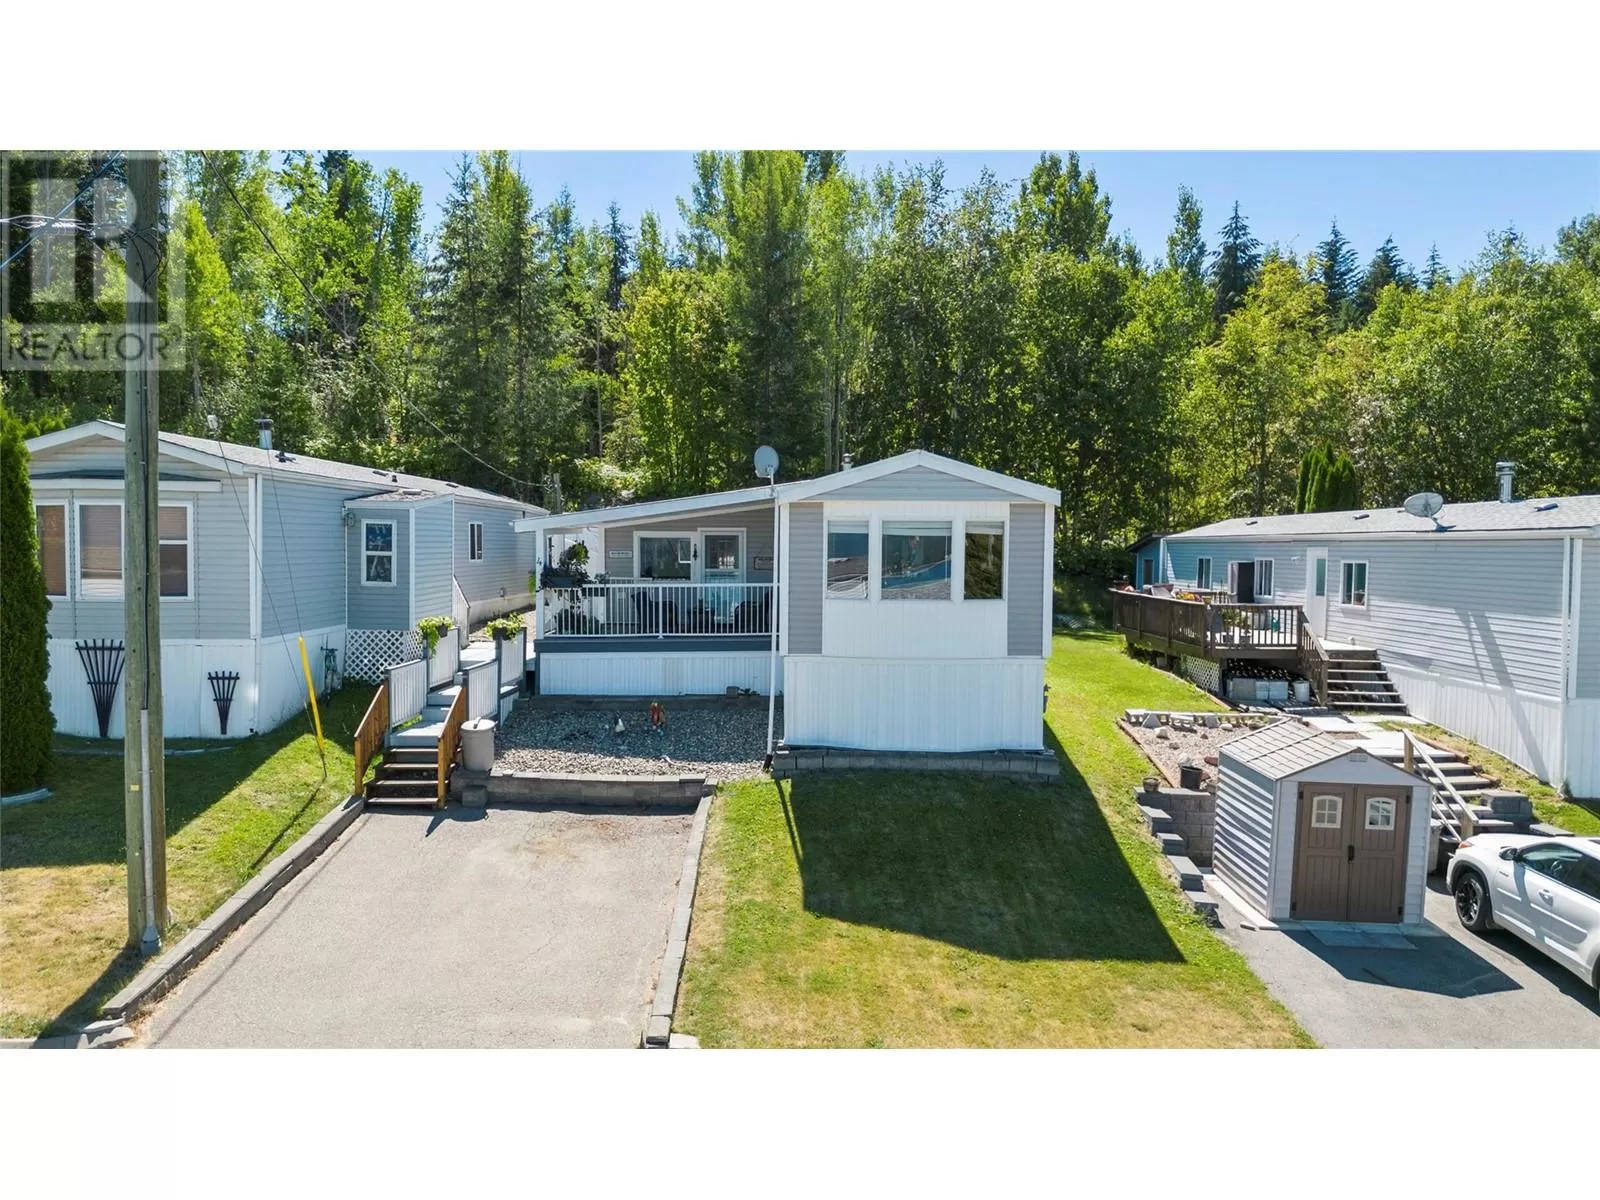 Manufactured Home for rent: #4 1420 Trans Canada Highway, Sorrento, British Columbia V0E 2W2